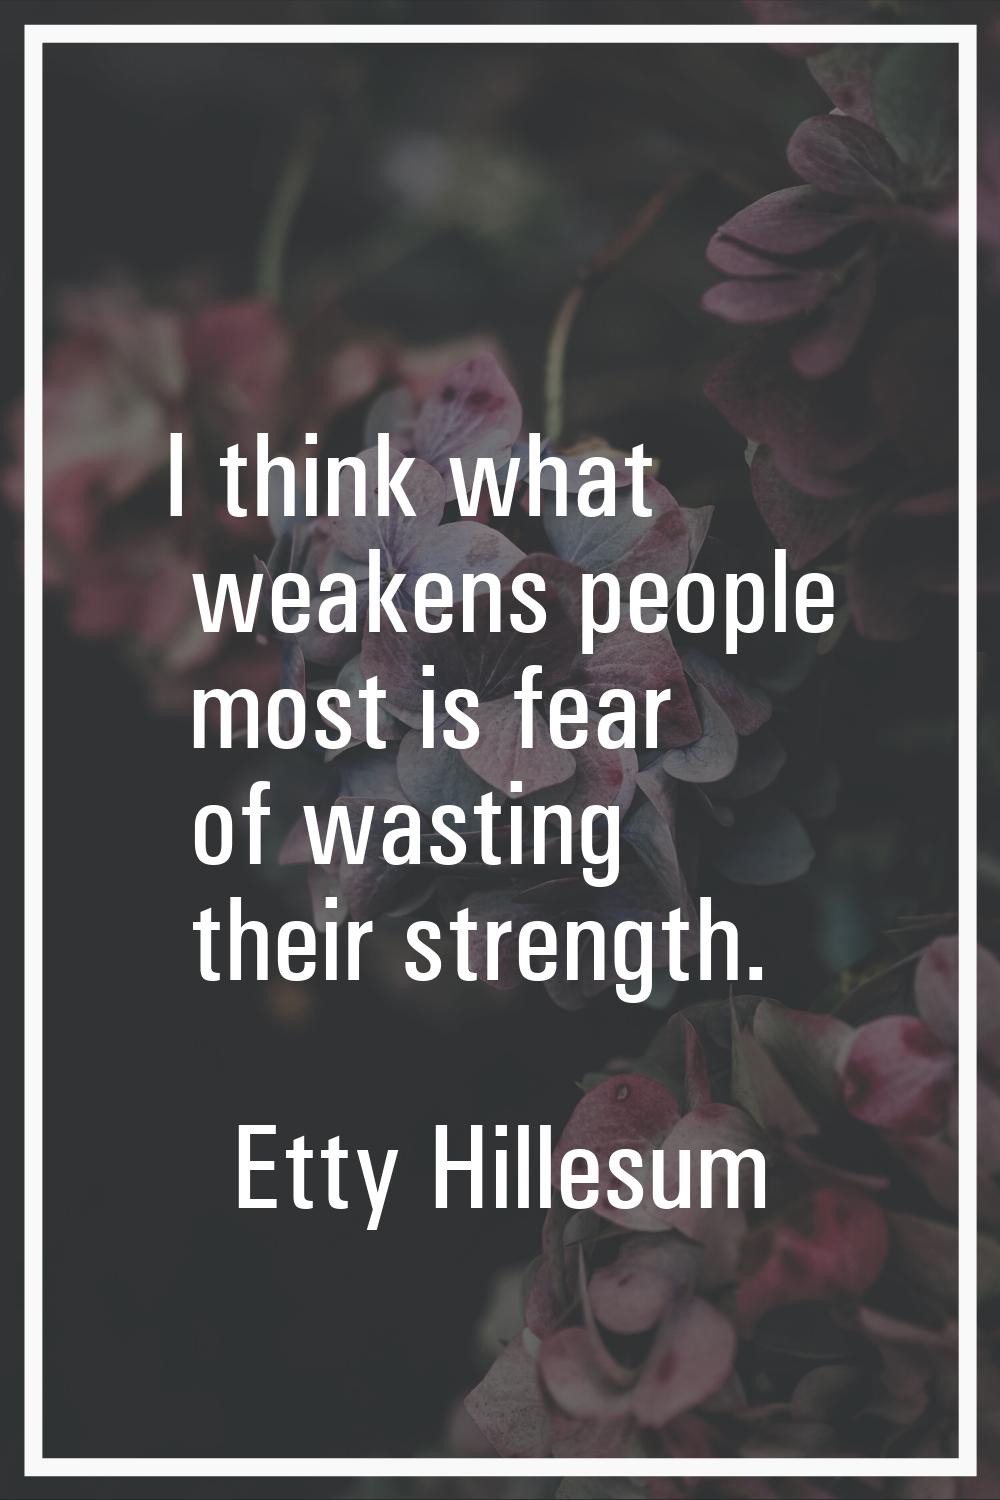 I think what weakens people most is fear of wasting their strength.